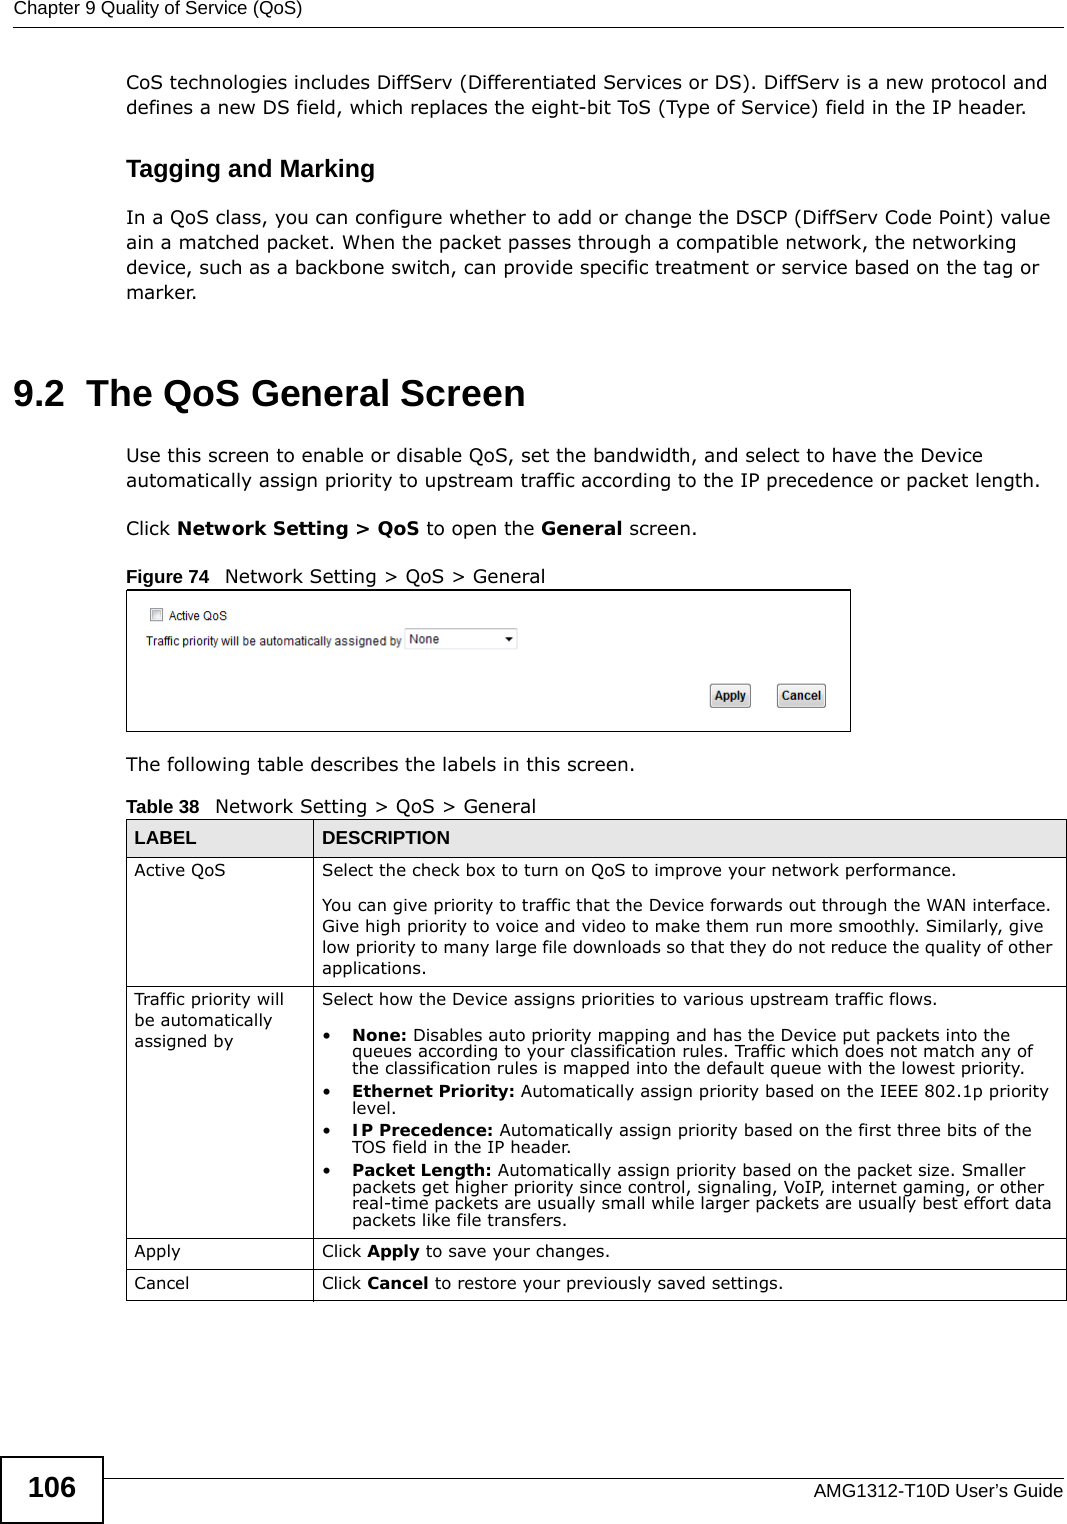 Chapter 9 Quality of Service (QoS)AMG1312-T10D User’s Guide106CoS technologies includes DiffServ (Differentiated Services or DS). DiffServ is a new protocol and defines a new DS field, which replaces the eight-bit ToS (Type of Service) field in the IP header. Tagging and MarkingIn a QoS class, you can configure whether to add or change the DSCP (DiffServ Code Point) value ain a matched packet. When the packet passes through a compatible network, the networking device, such as a backbone switch, can provide specific treatment or service based on the tag or marker.9.2  The QoS General Screen Use this screen to enable or disable QoS, set the bandwidth, and select to have the Device automatically assign priority to upstream traffic according to the IP precedence or packet length.Click Network Setting &gt; QoS to open the General screen.  Figure 74   Network Setting &gt; QoS &gt; GeneralThe following table describes the labels in this screen. Table 38   Network Setting &gt; QoS &gt; GeneralLABEL DESCRIPTIONActive QoS Select the check box to turn on QoS to improve your network performance. You can give priority to traffic that the Device forwards out through the WAN interface. Give high priority to voice and video to make them run more smoothly. Similarly, give low priority to many large file downloads so that they do not reduce the quality of other applications. Traffic priority will be automatically assigned bySelect how the Device assigns priorities to various upstream traffic flows.•None: Disables auto priority mapping and has the Device put packets into the queues according to your classification rules. Traffic which does not match any of the classification rules is mapped into the default queue with the lowest priority.•Ethernet Priority: Automatically assign priority based on the IEEE 802.1p priority level.•IP Precedence: Automatically assign priority based on the first three bits of the TOS field in the IP header.•Packet Length: Automatically assign priority based on the packet size. Smaller packets get higher priority since control, signaling, VoIP, internet gaming, or other real-time packets are usually small while larger packets are usually best effort data packets like file transfers.Apply Click Apply to save your changes.Cancel Click Cancel to restore your previously saved settings.